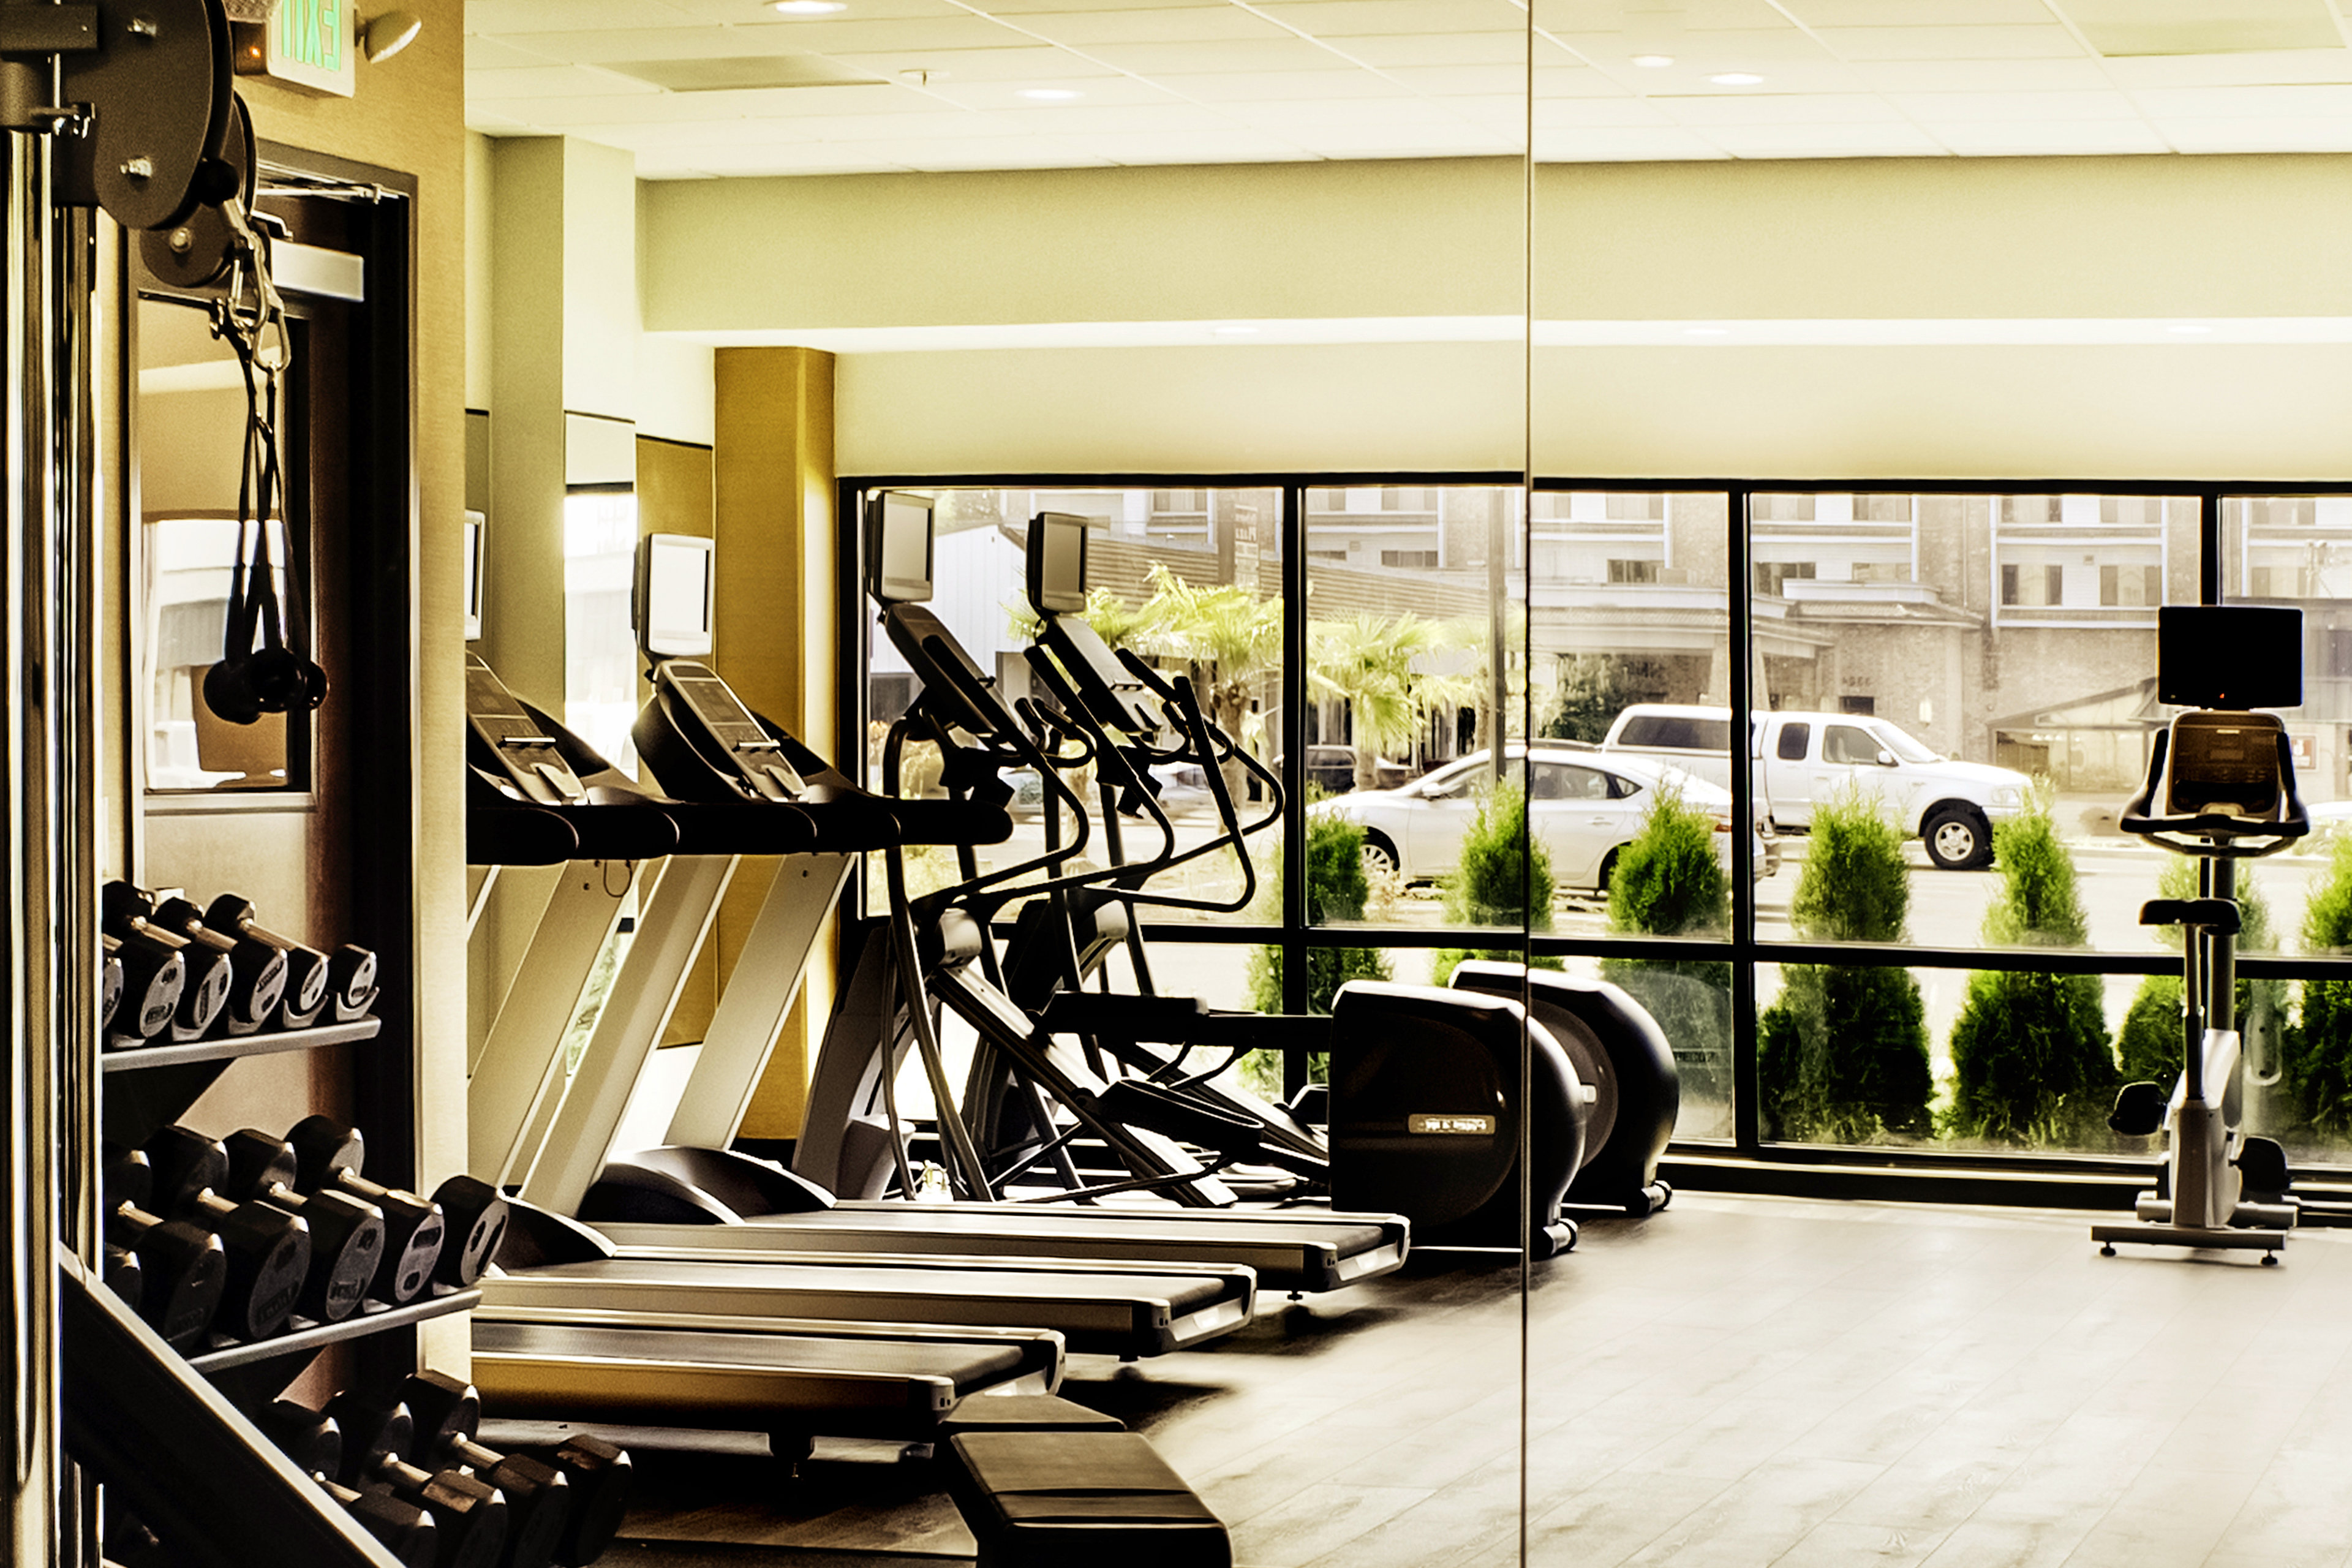 Our Fitness Center has everything needed for an effective workout!